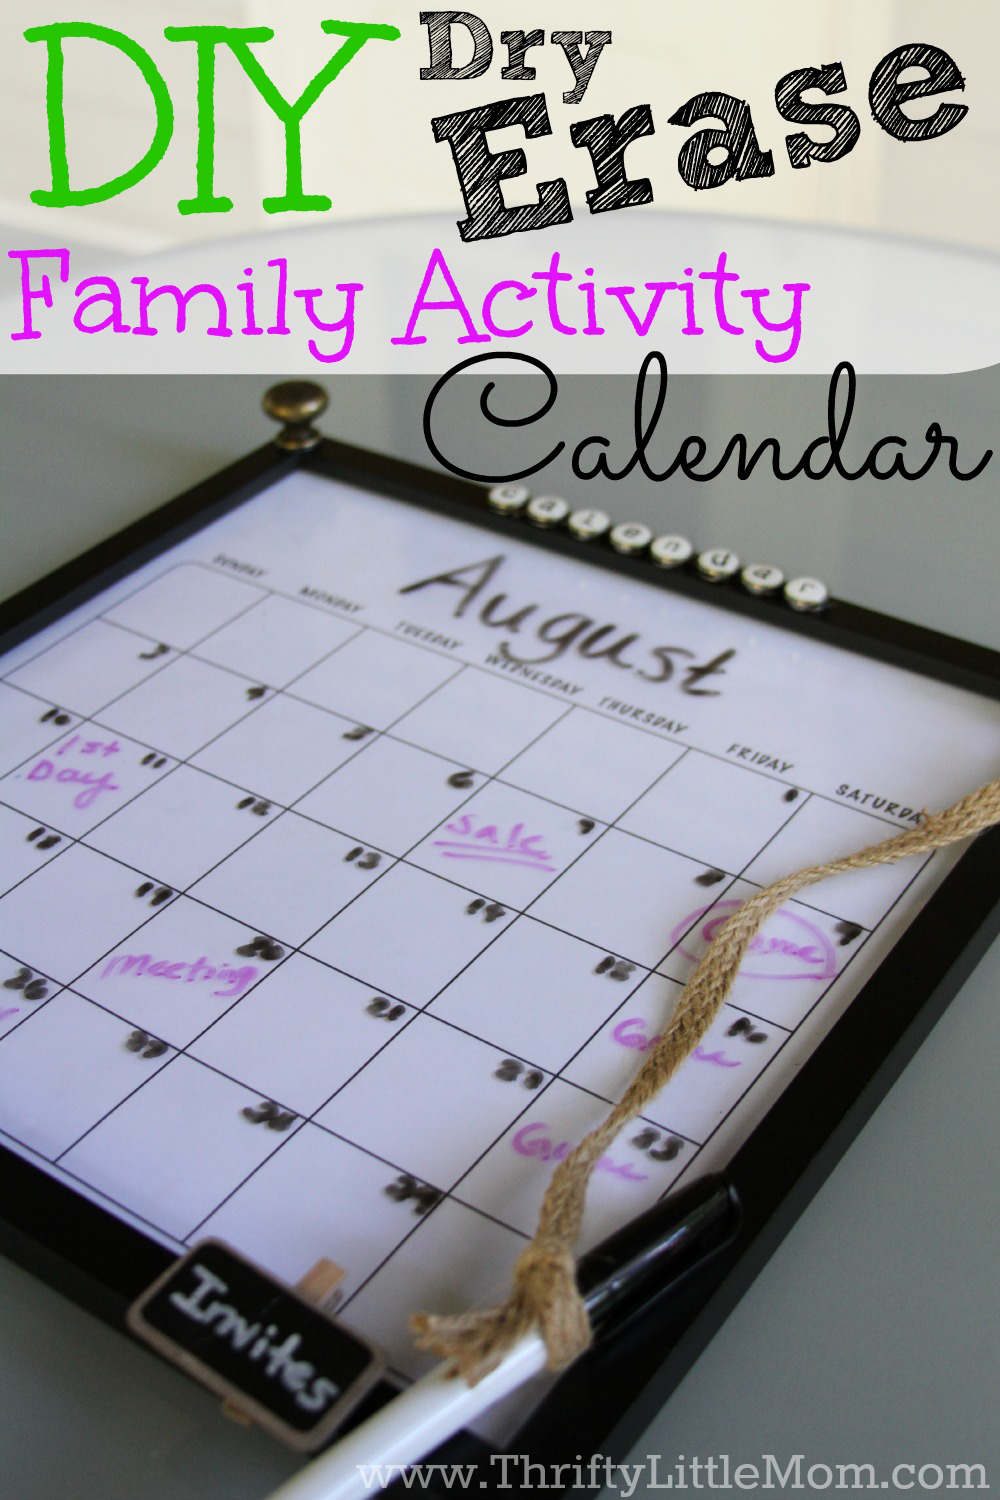 DIY Dry Erase Family Activity Calendar. Create a place to keep all your family schedules, invites and plans together in one spot and stay on top of your ever growing list of family activities